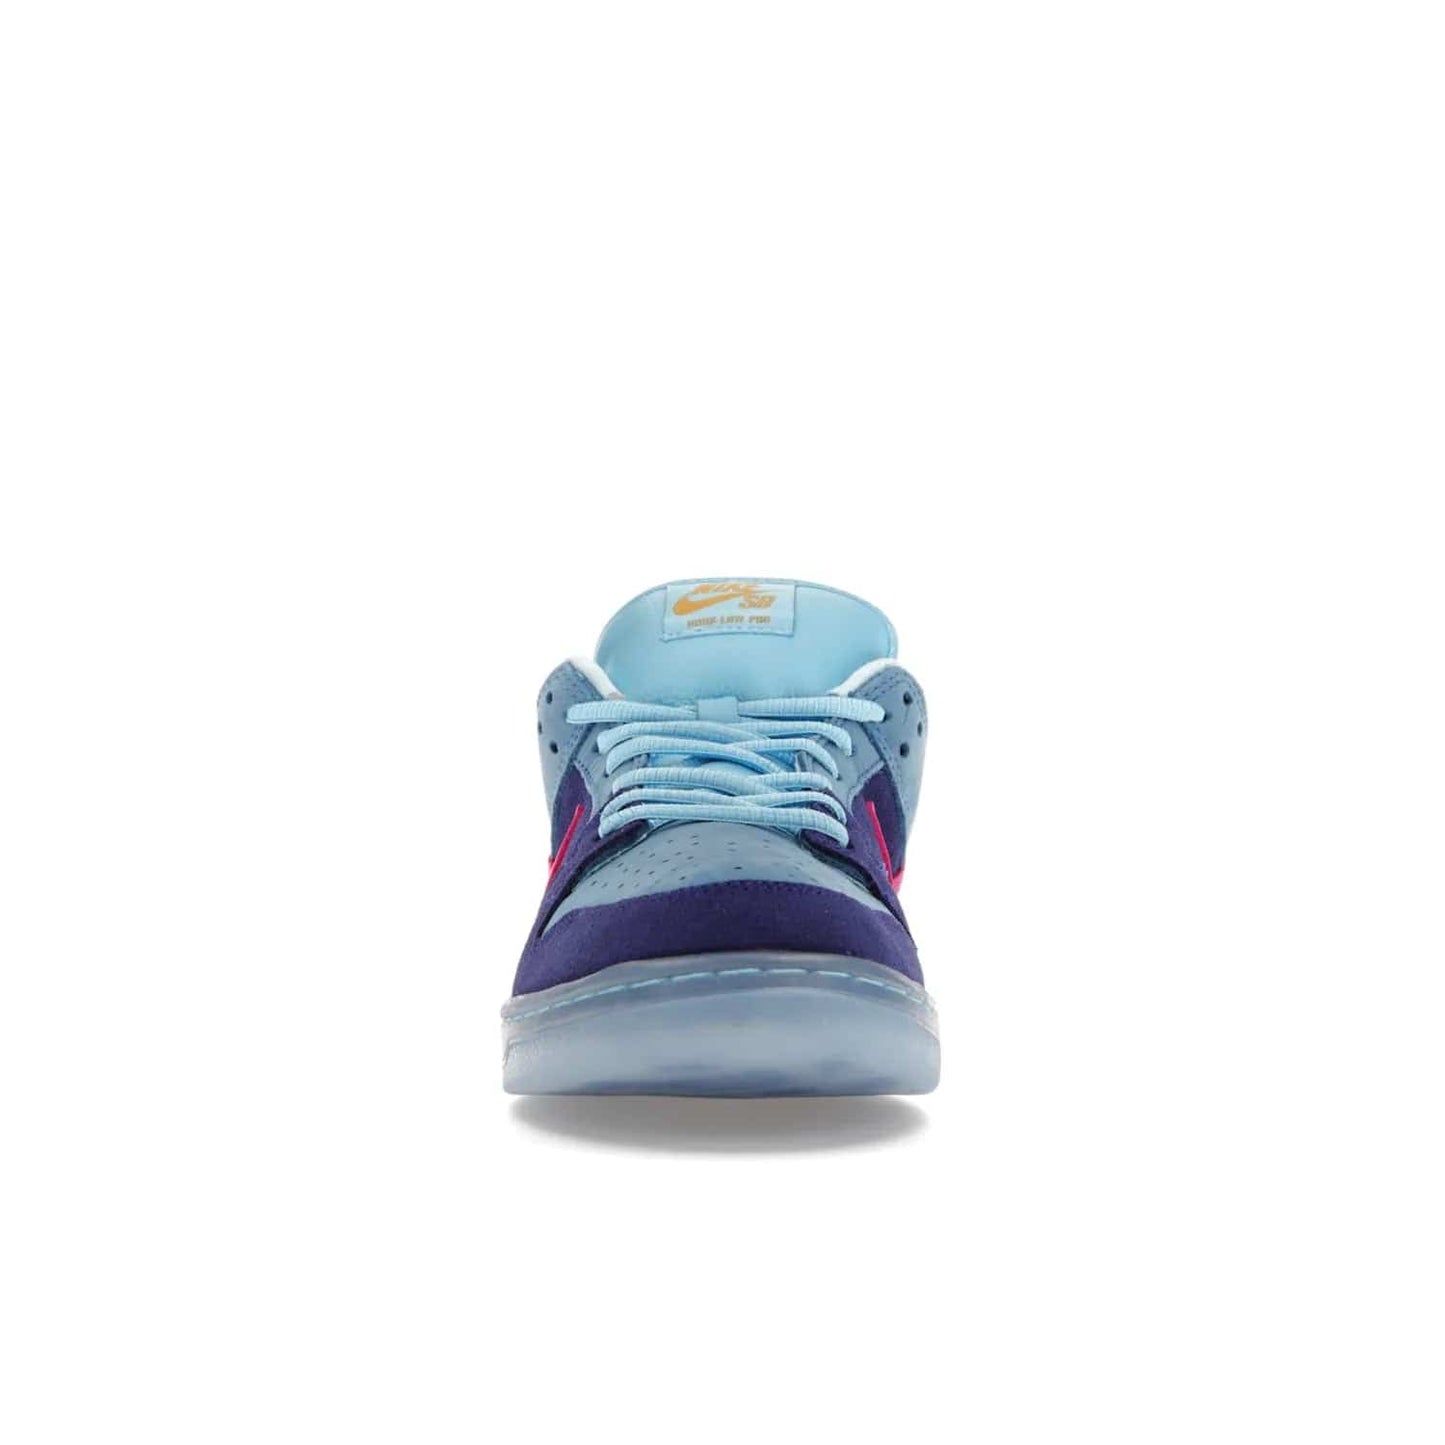 Nike SB Dunk Low Run The Jewels - Image 10 - Only at www.BallersClubKickz.com - The Nike SB Dunk Low Run The Jewels pays tribute to the Run the Jewels 3 album cover. It features a blue suede upper with pink suede accents, gold branding and 3 lace sets. RTJ insoles complete this limited edition sneaker. Get it now for your shoe collection.